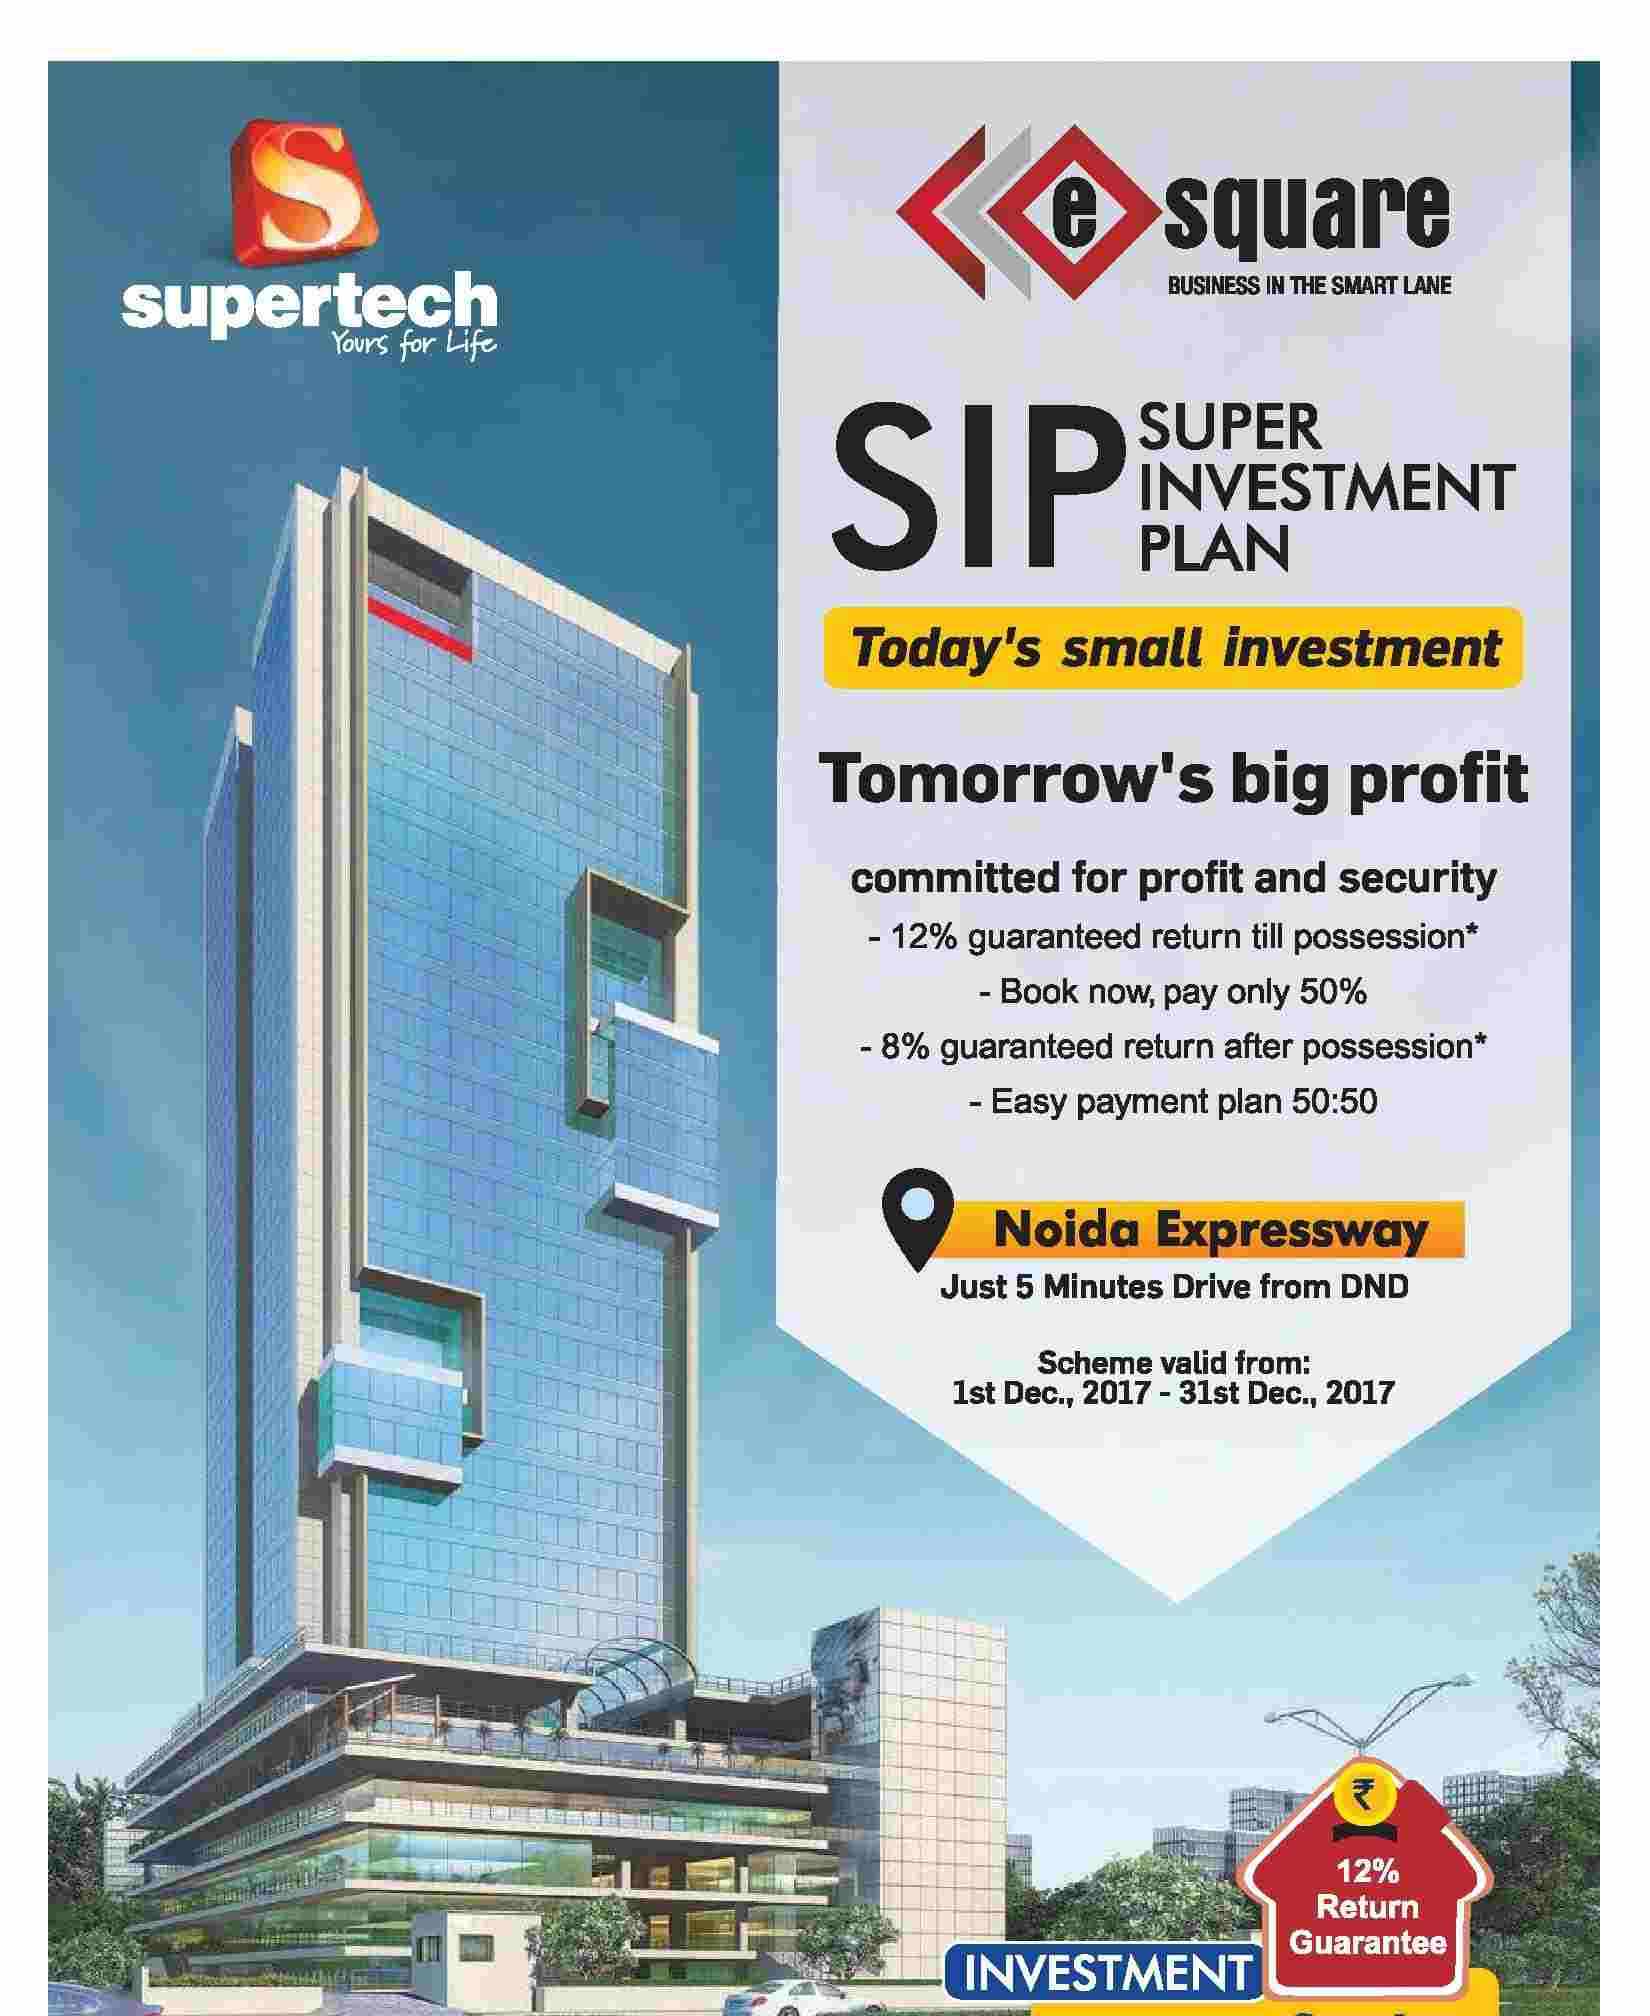 Invest today for tomorrow's big profit at Supertech E Square in Noida Update